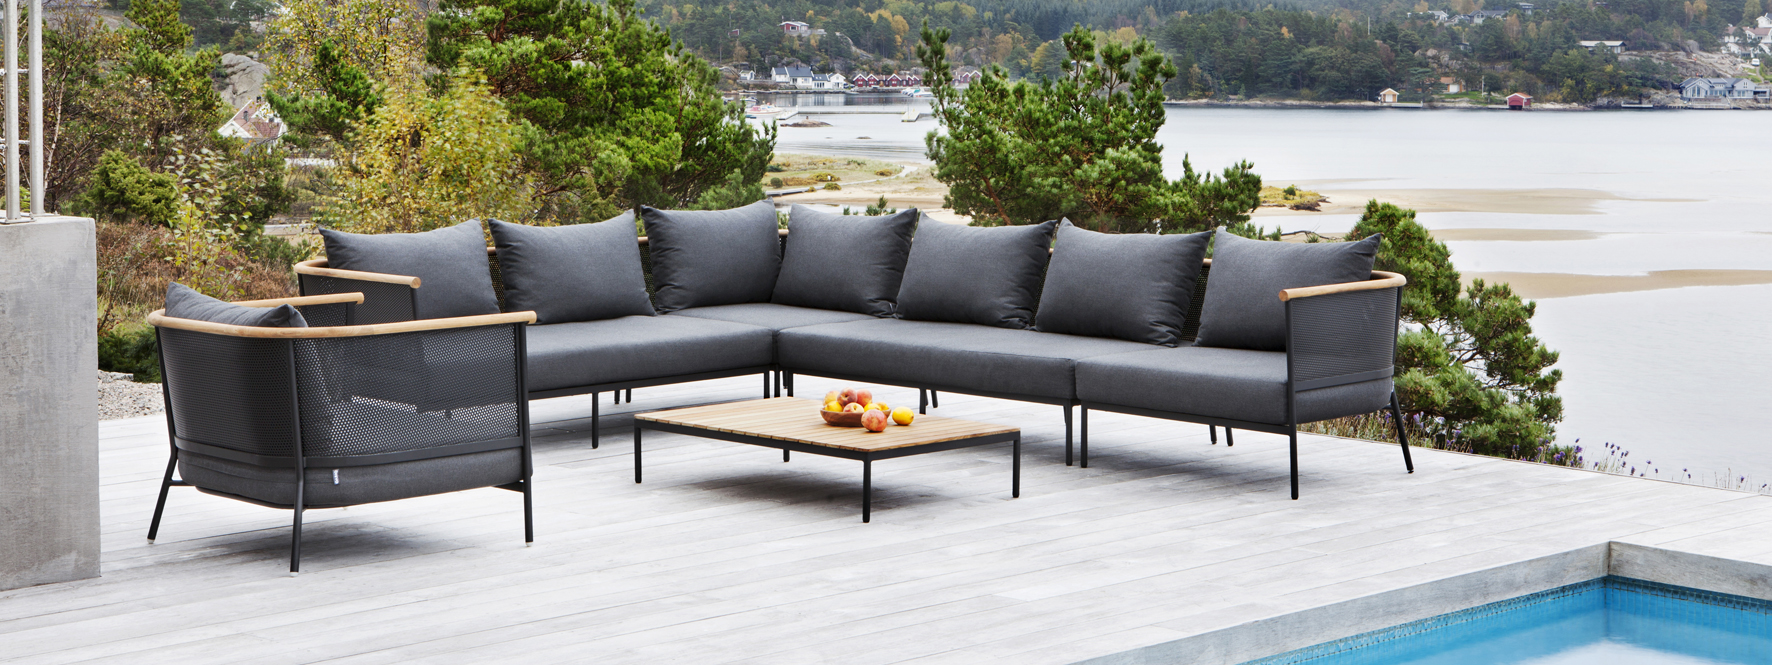 RIAD Outdoor Sectional Sofa from Oasiq